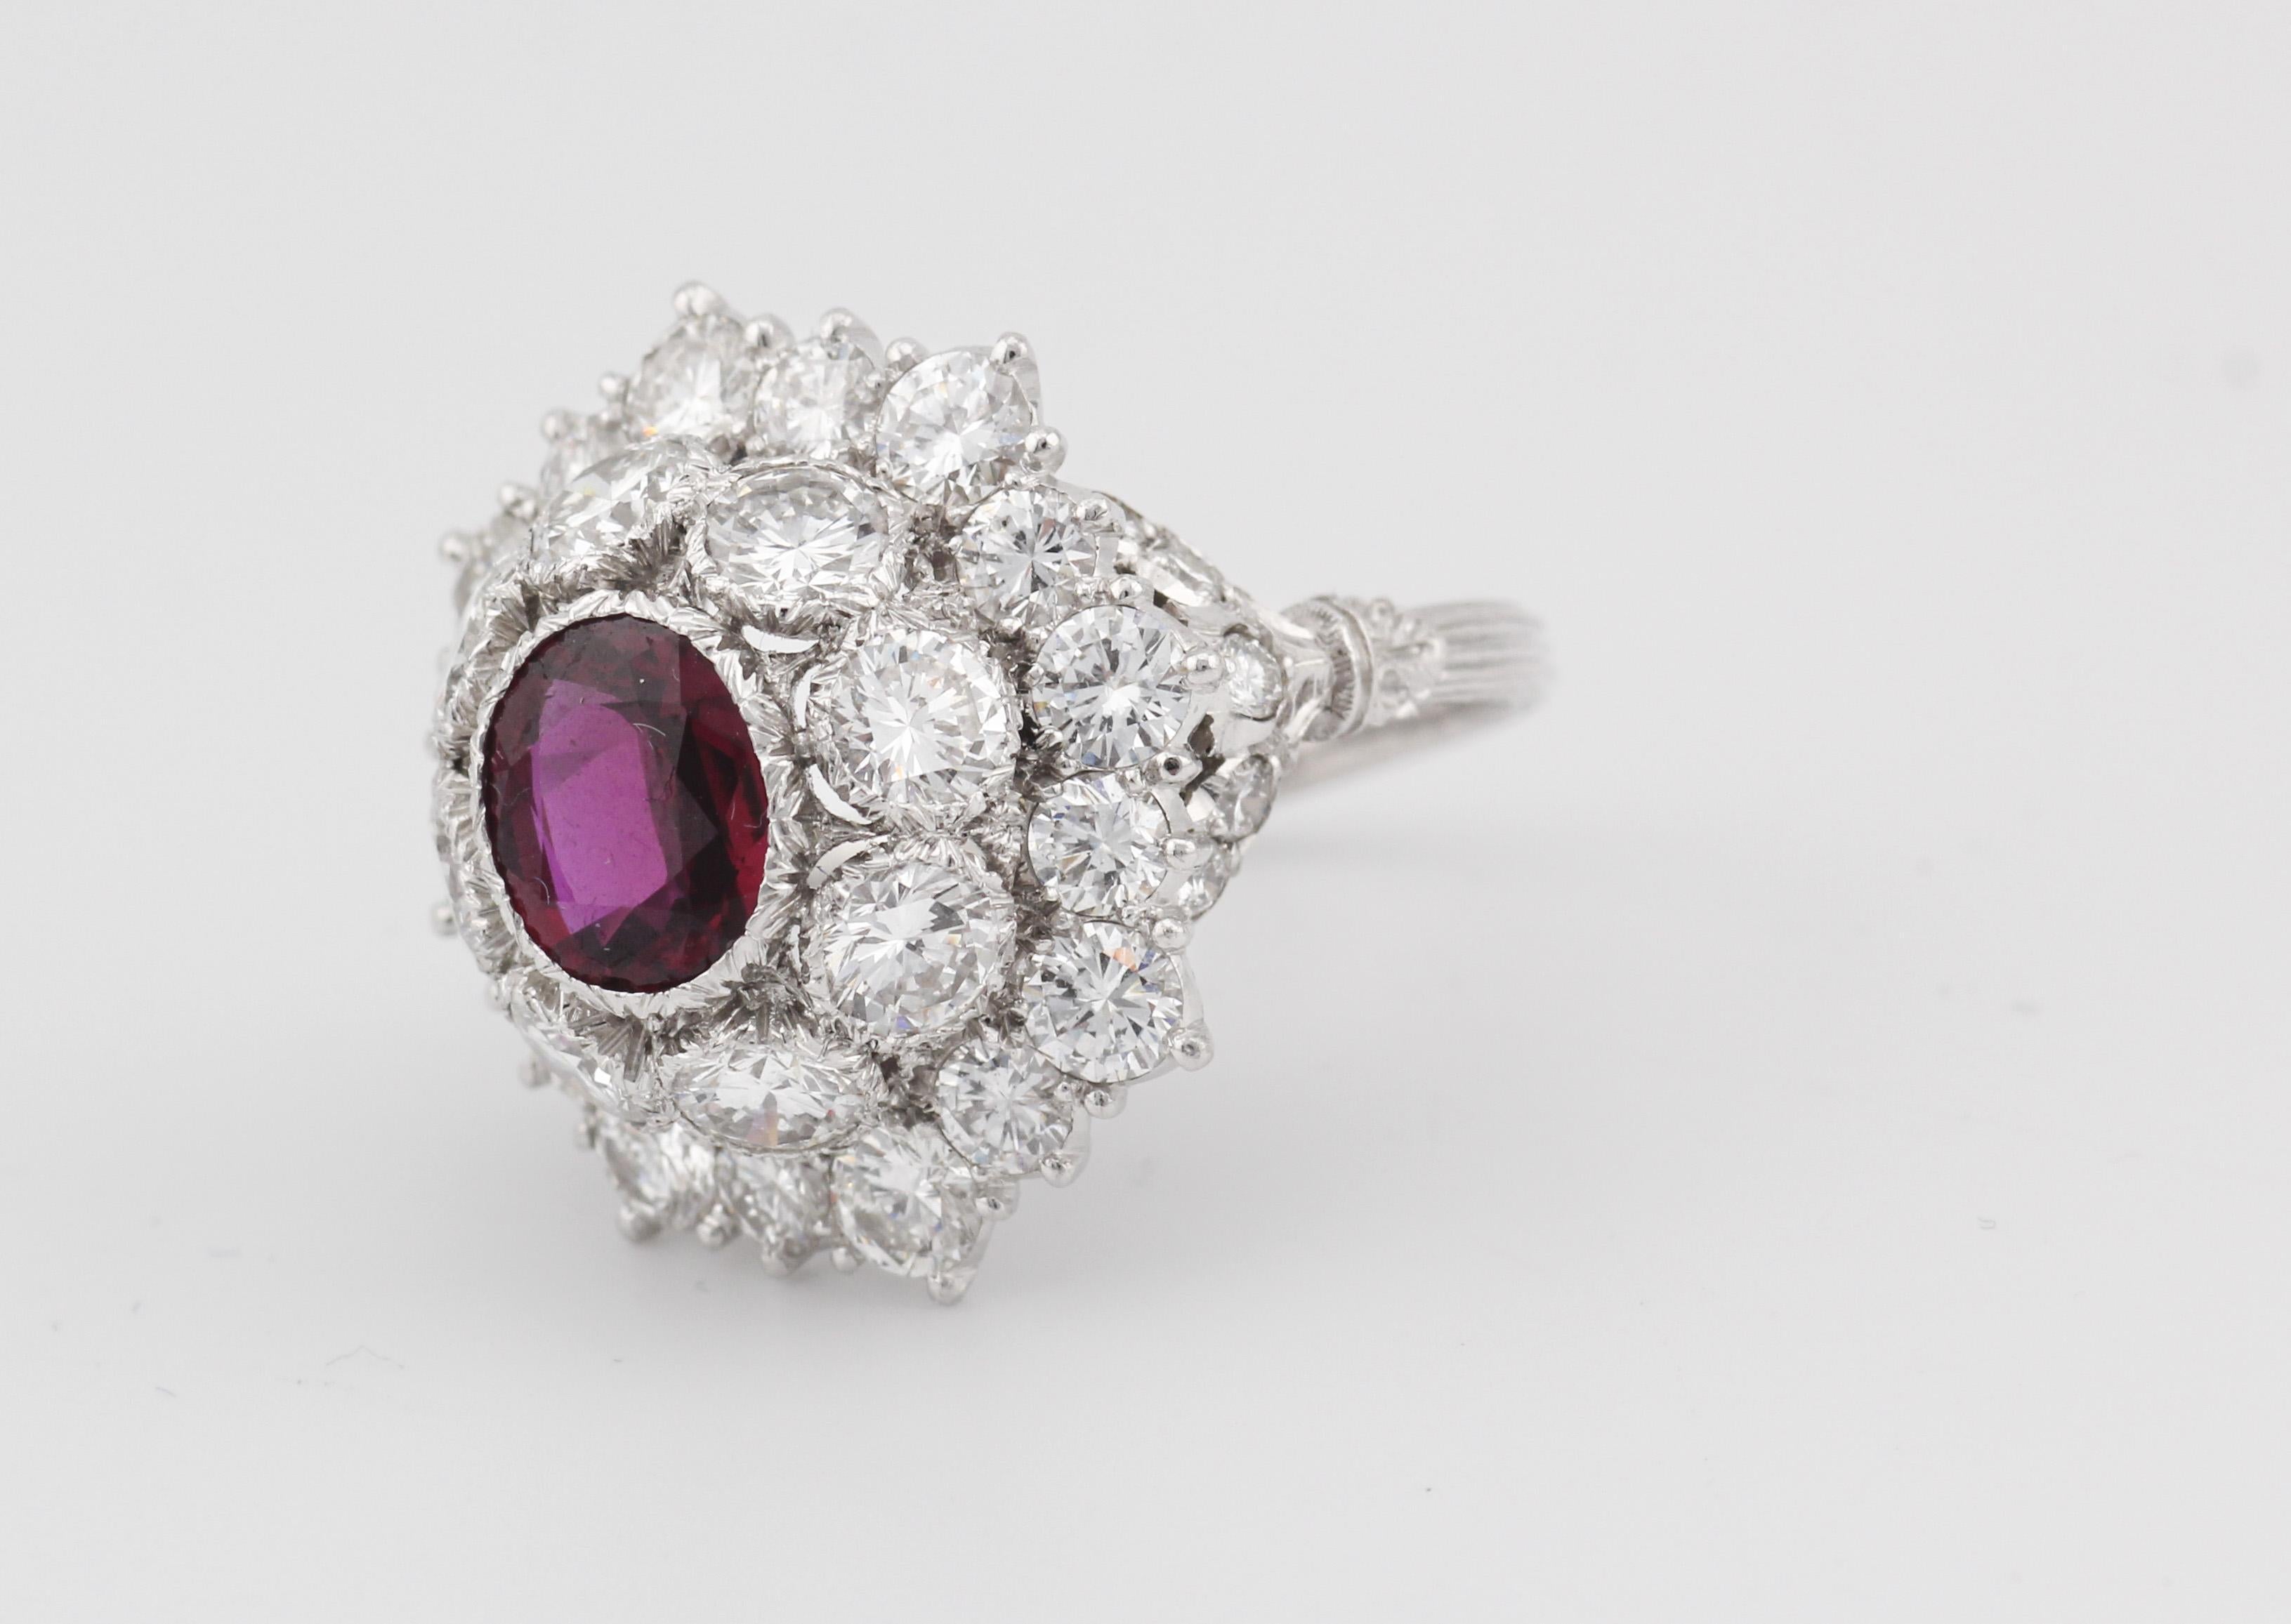 Vintage Buccellati 1.5 Carat No Heat Thai Ruby Diamond Platinum Ring Size 6.5 In Good Condition For Sale In Bellmore, NY